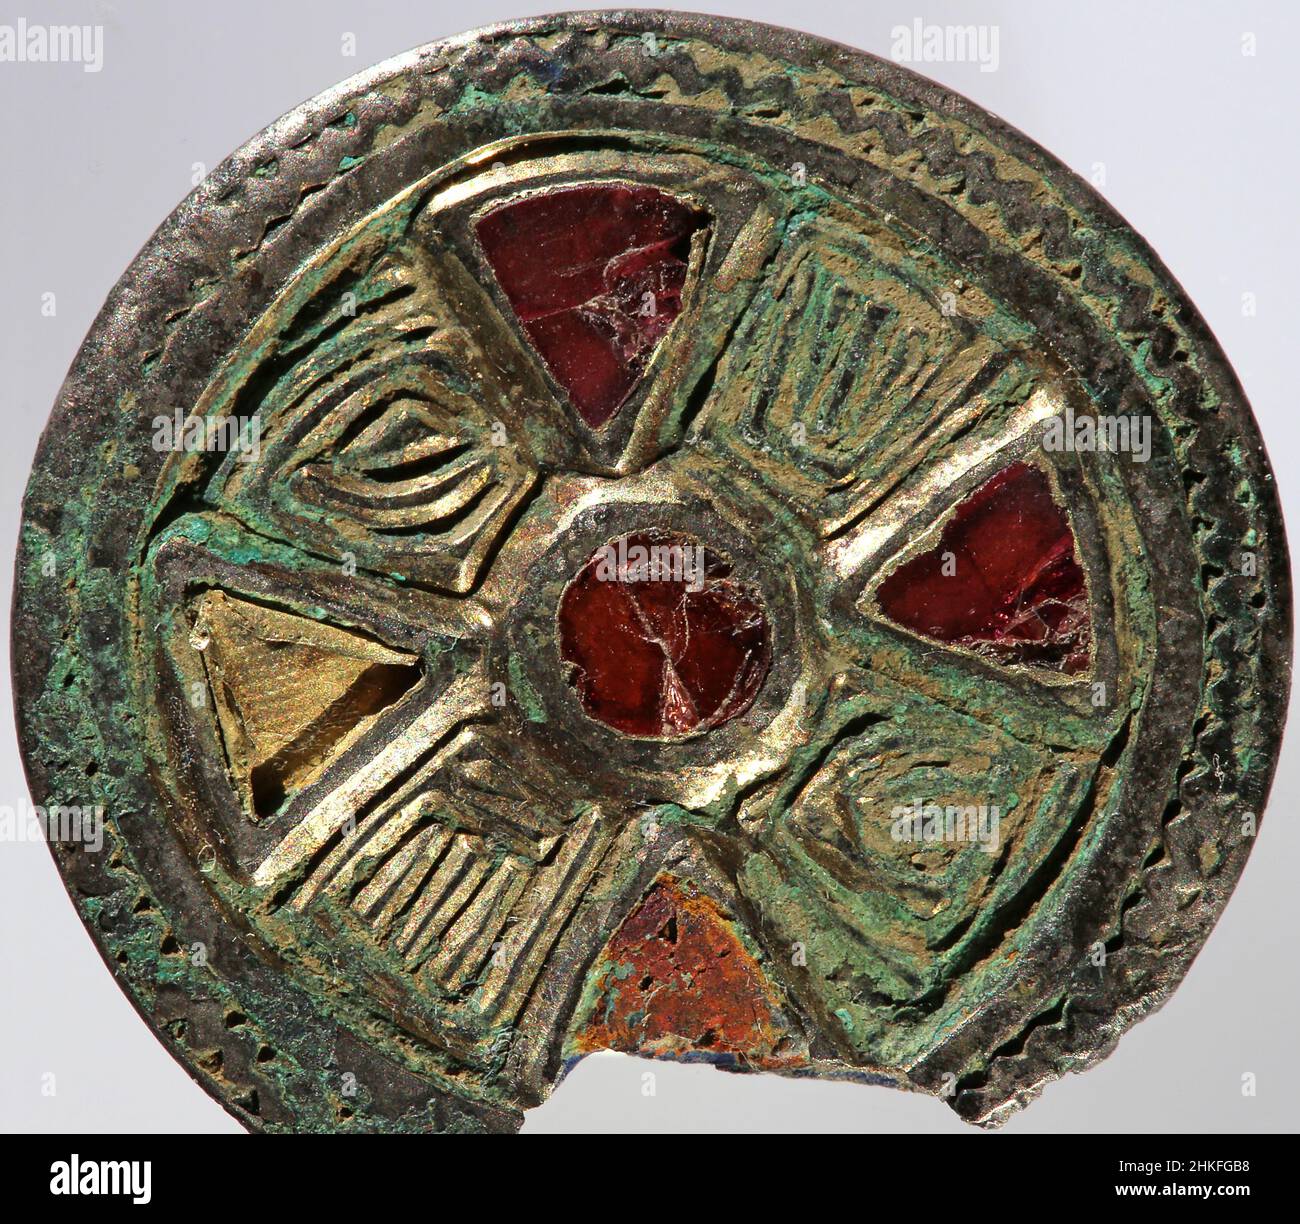 Anglo-Saxon disc brooch Stock Photo